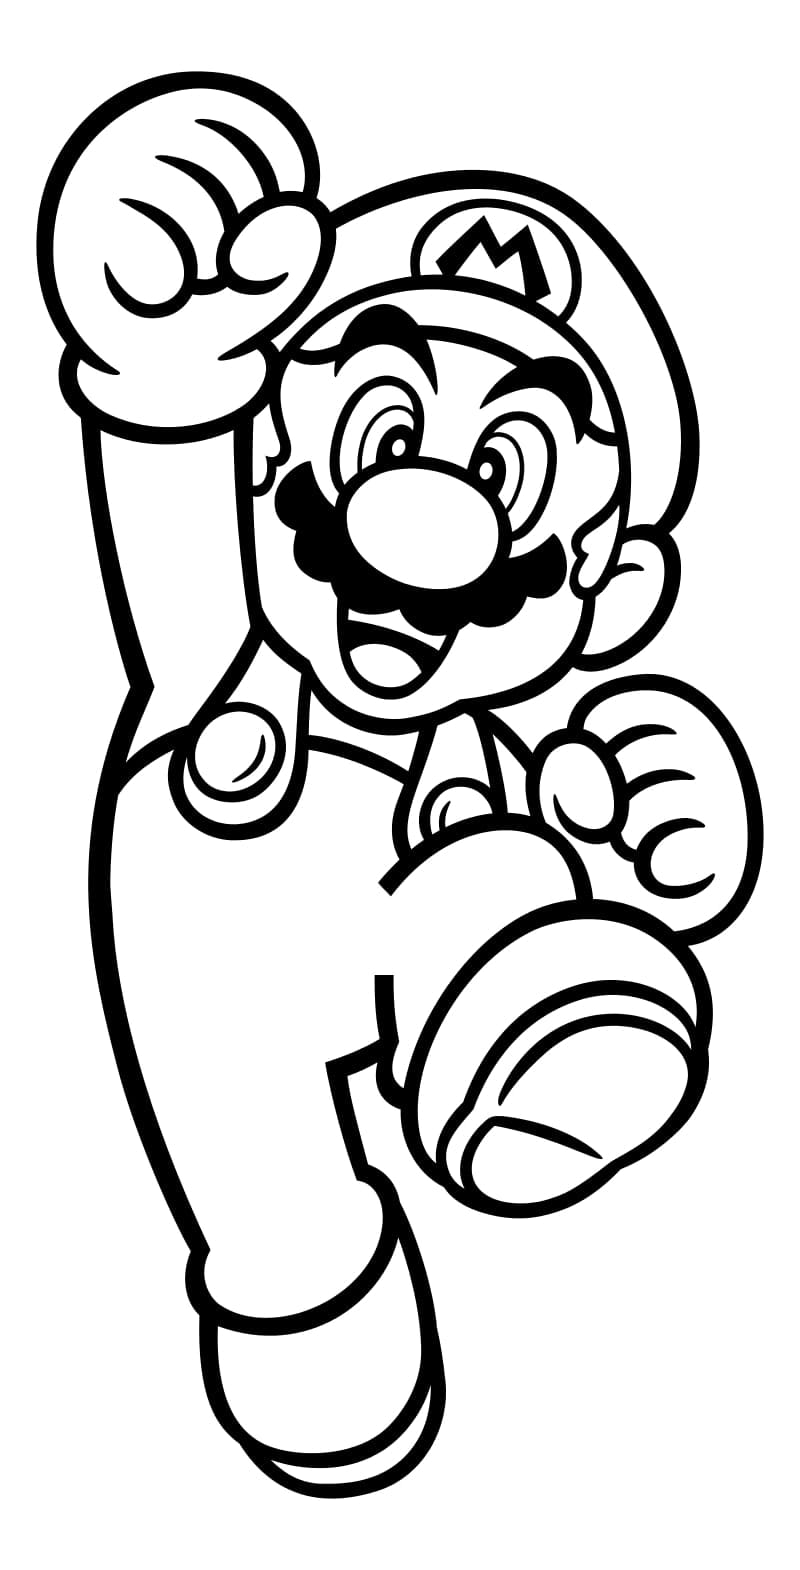 Drawing 27 of Super Mario to print and color